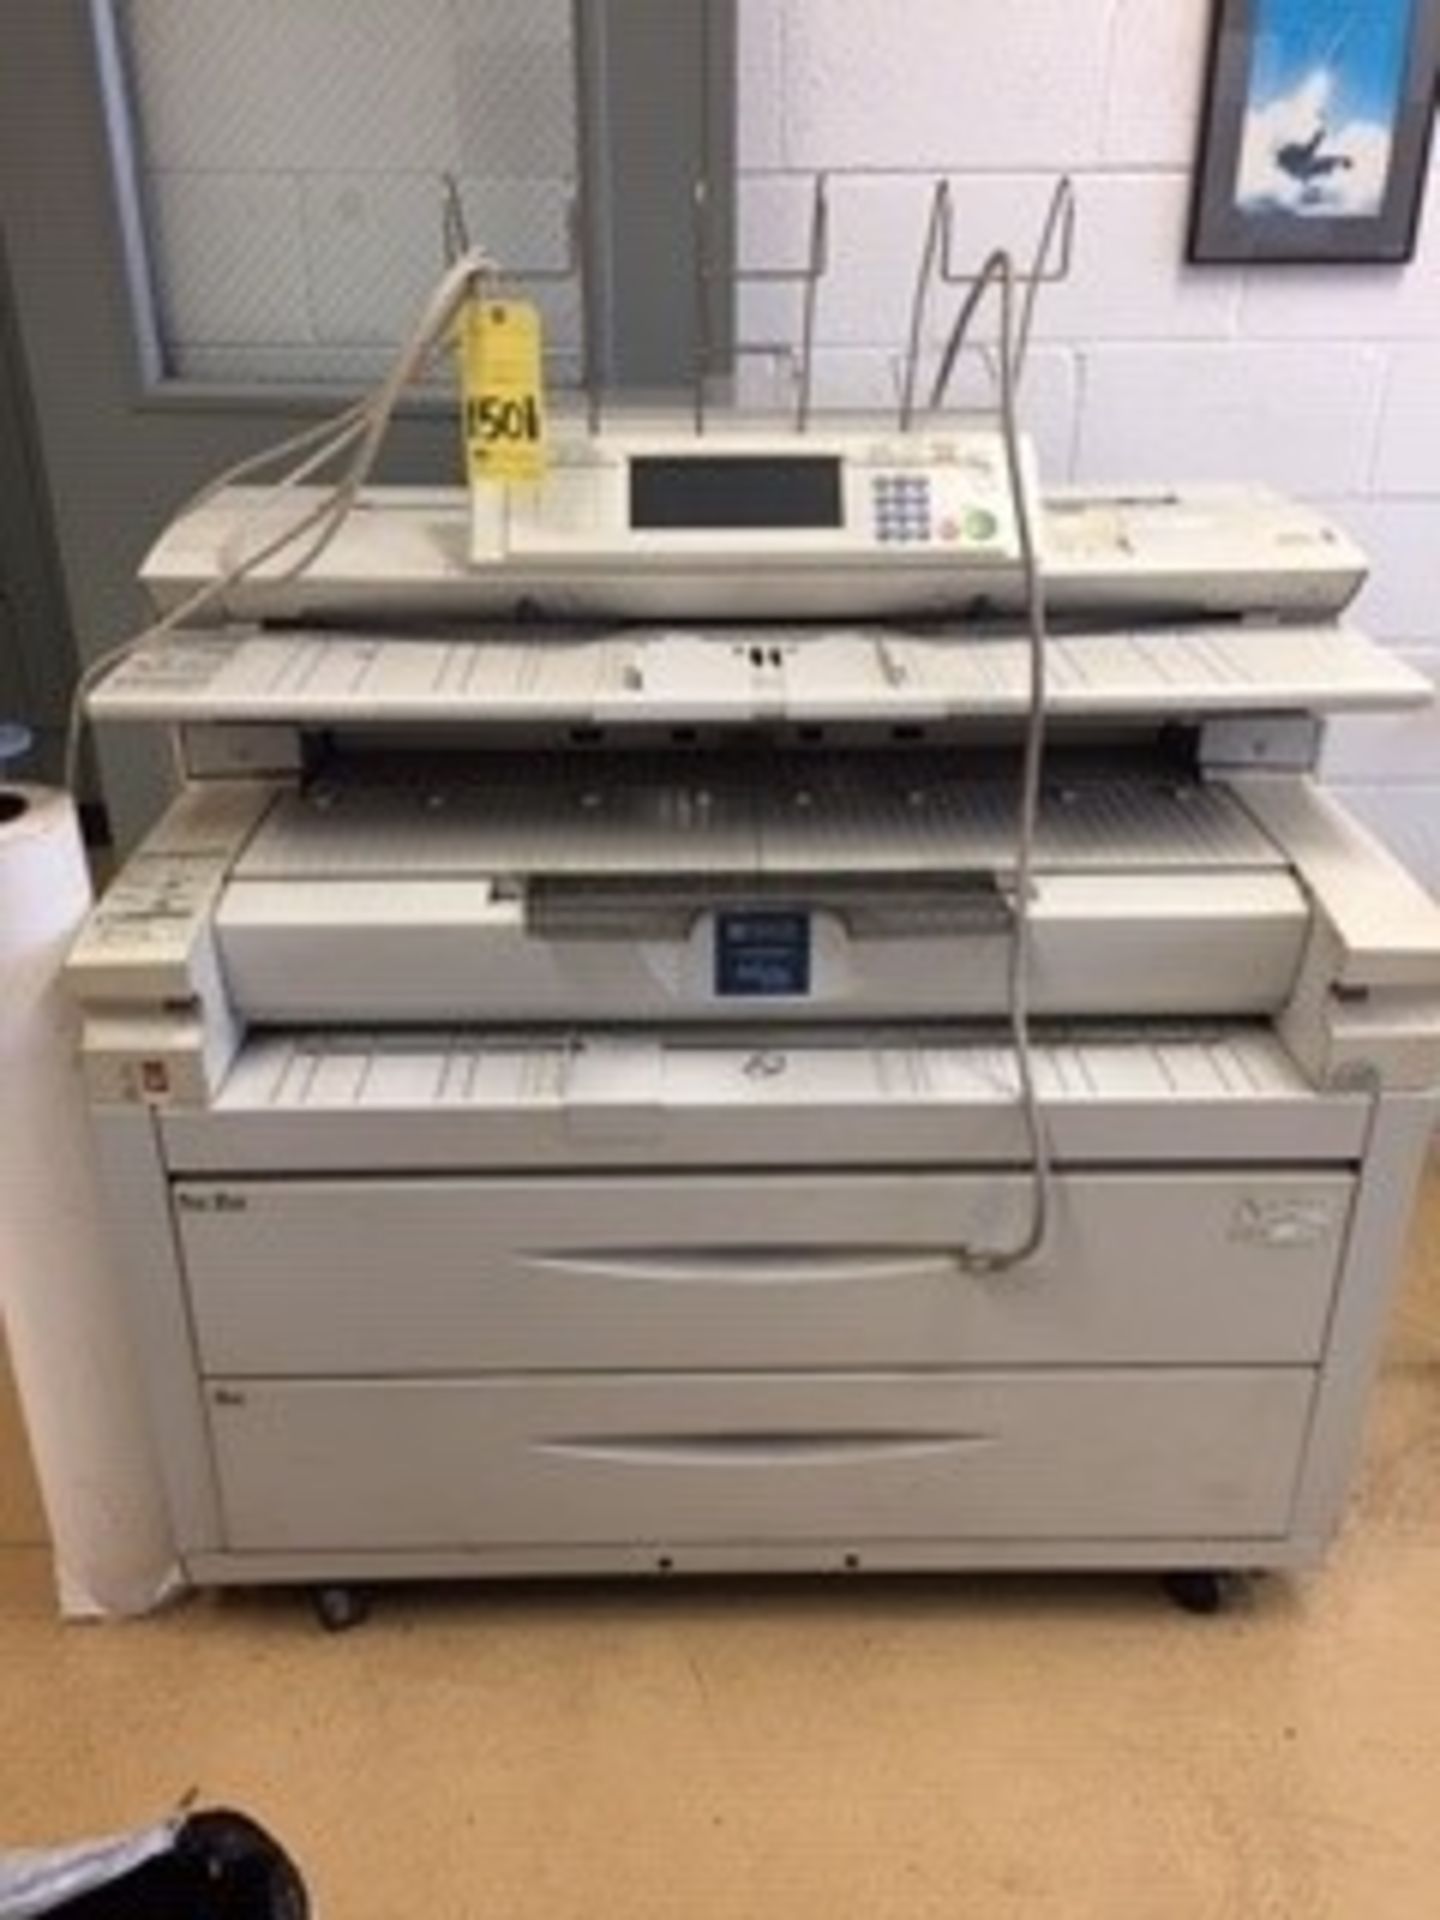 COPIER, RICOH ATICIO 470W A070-LW410, S/N J2020900092 (Located at: Midland Stamping & Fabricating,